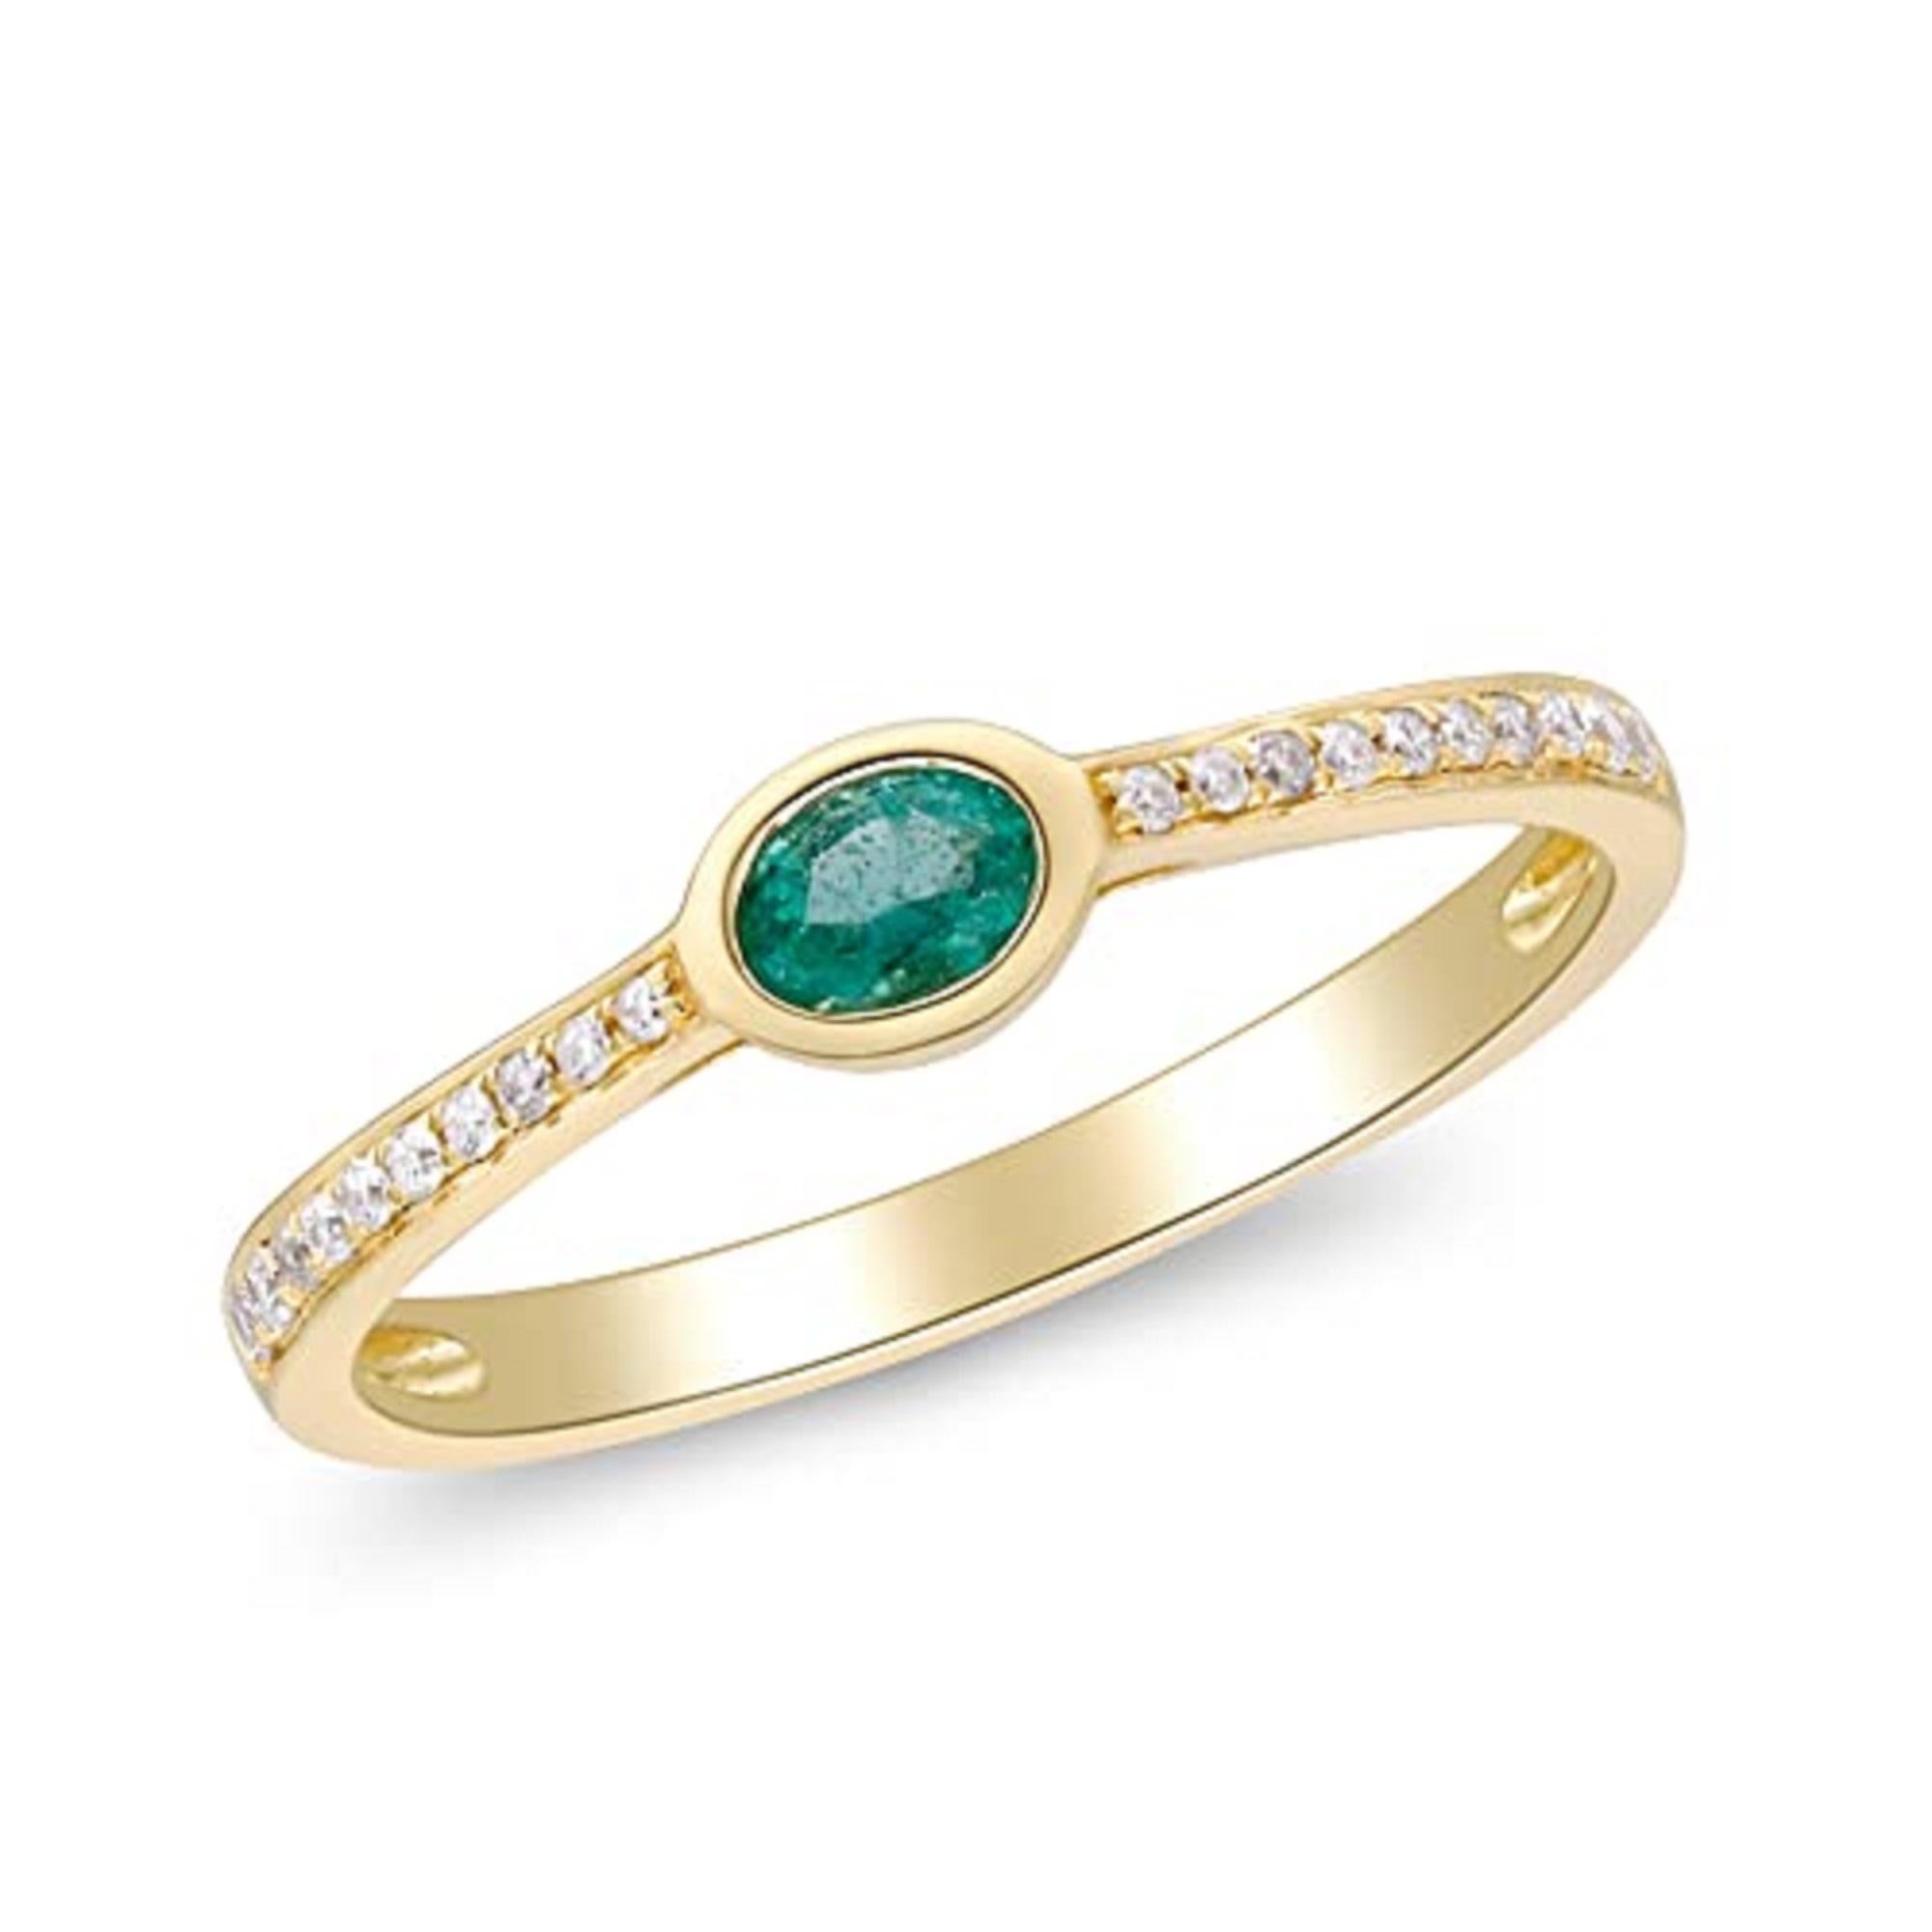 Decorate yourself in elegance with this Ring is crafted from 14-karat Yellow Gold by Gin & Grace. This Ring is made up of 4x3 oval-cut Emerald (1 pcs) 0.15 carat and Round-cut White Diamond (20 pcs) 0.09 carat. This Ring is weight 1.63 grams. This